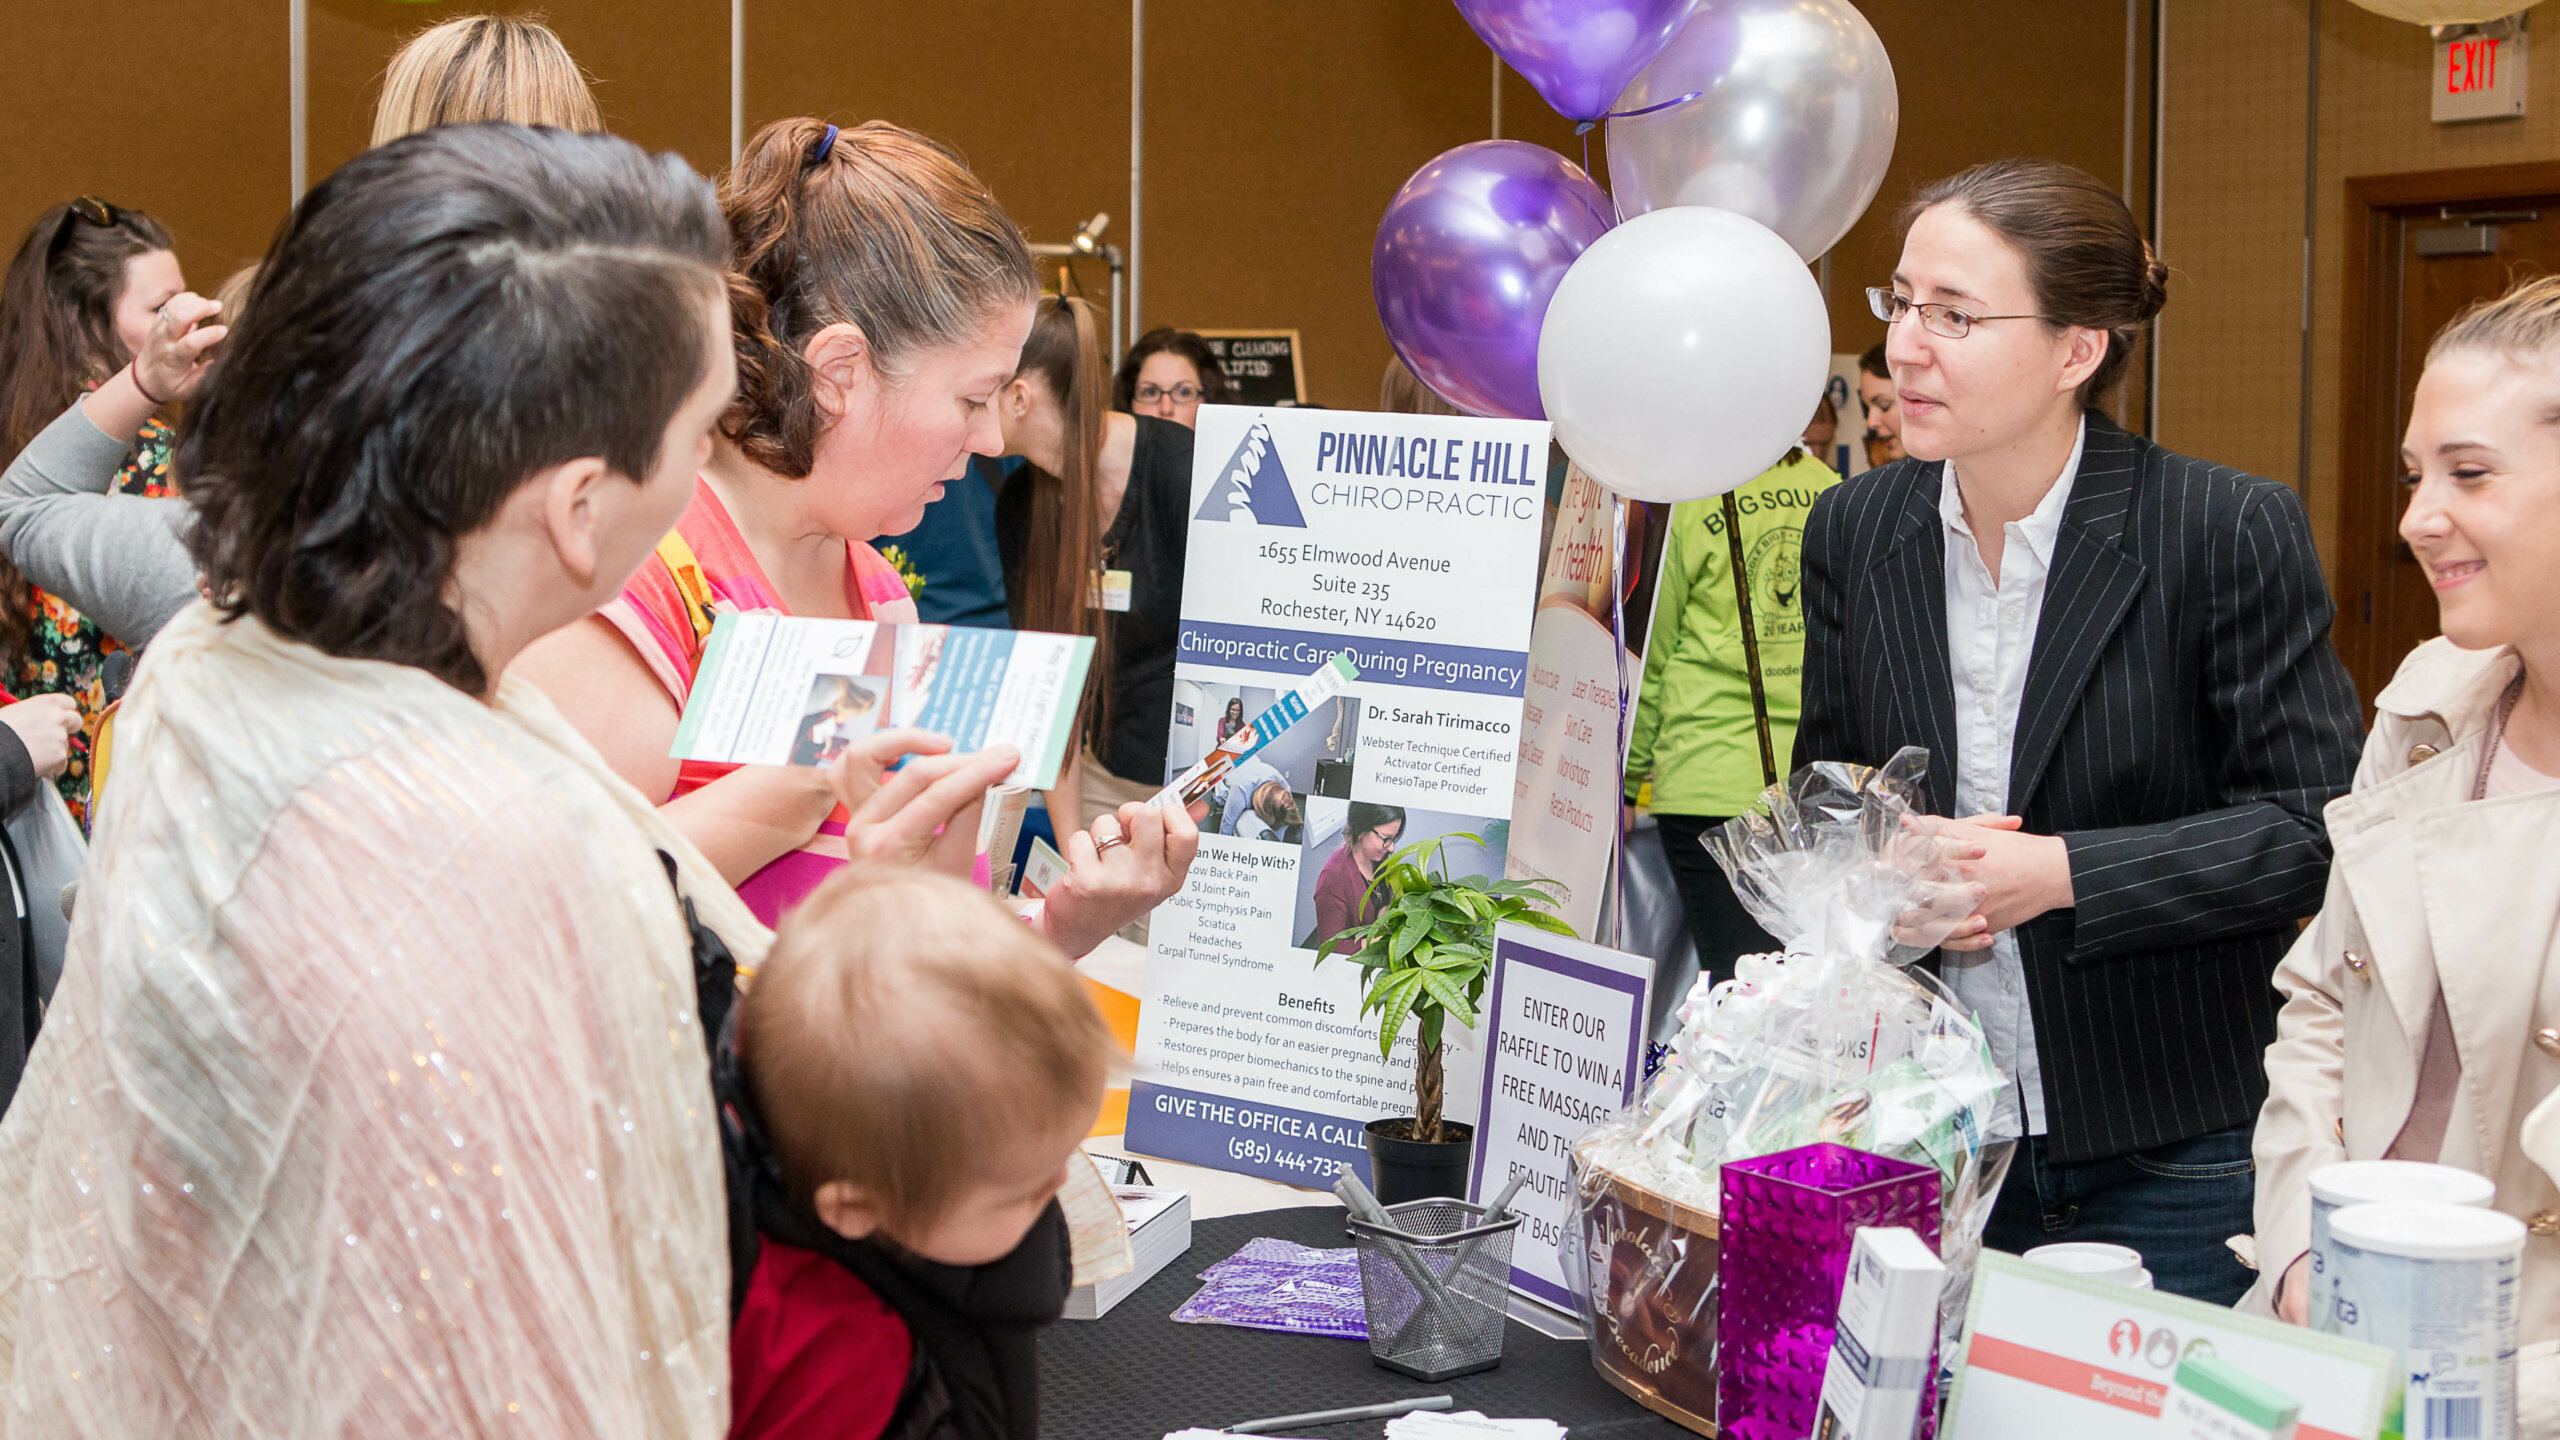 exhibitor and attendees at babies & bumps event